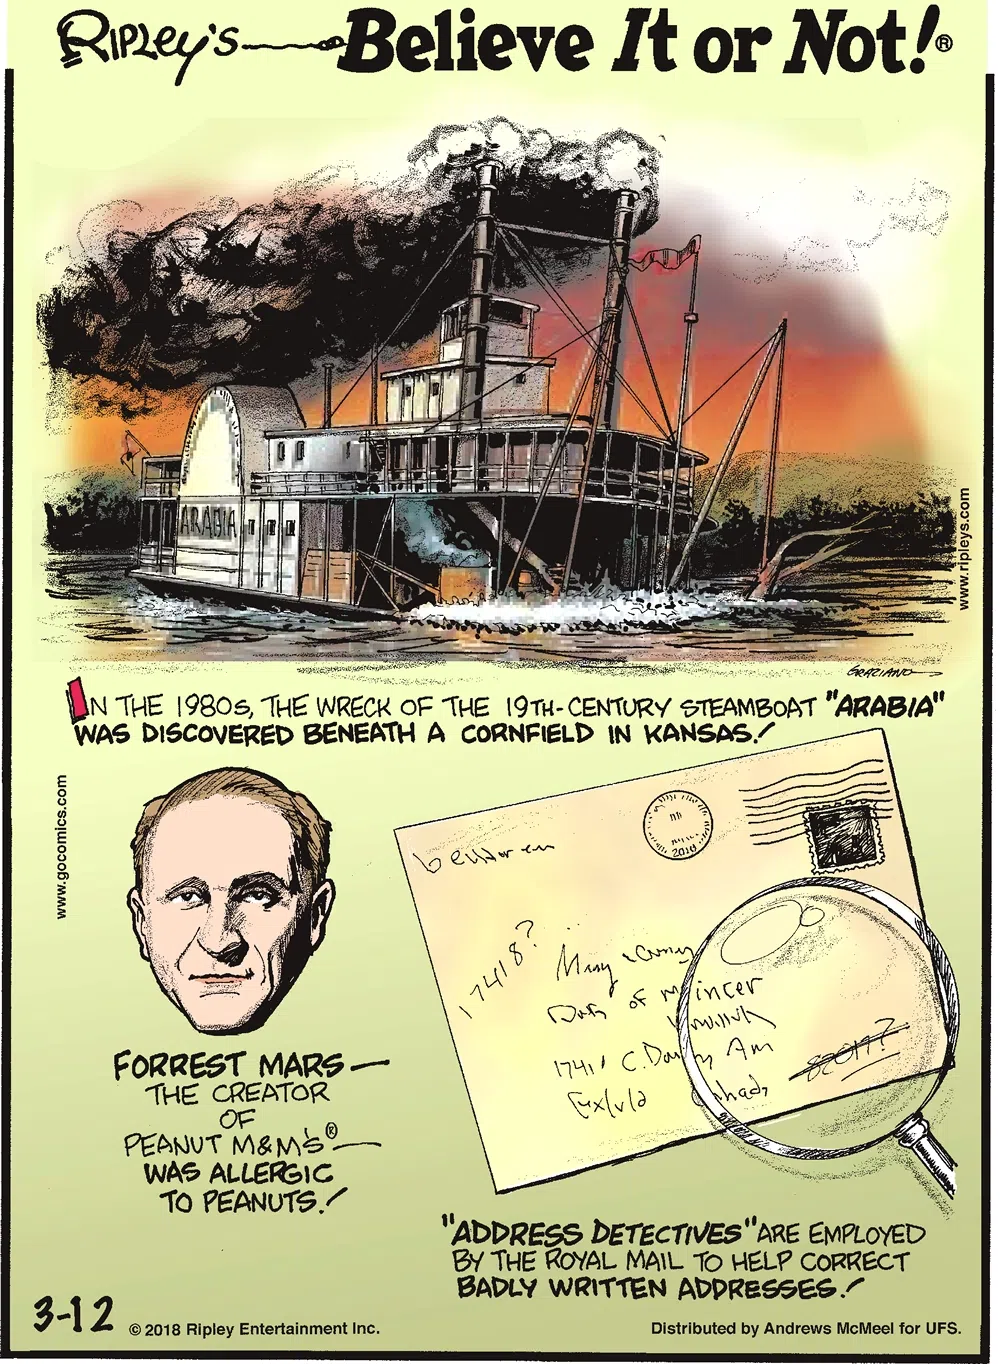 In the 1980s, the wreck of the 19th-century steamboat "Arabia" was discovered beneath a cornfield in Kansas!-------------------------- Forrest Mars - the creator of Peanut M&M's - was allergic to peanuts!-------------------- "Address detectives" are employed by the Royal Mail to help correct badly written addresses!